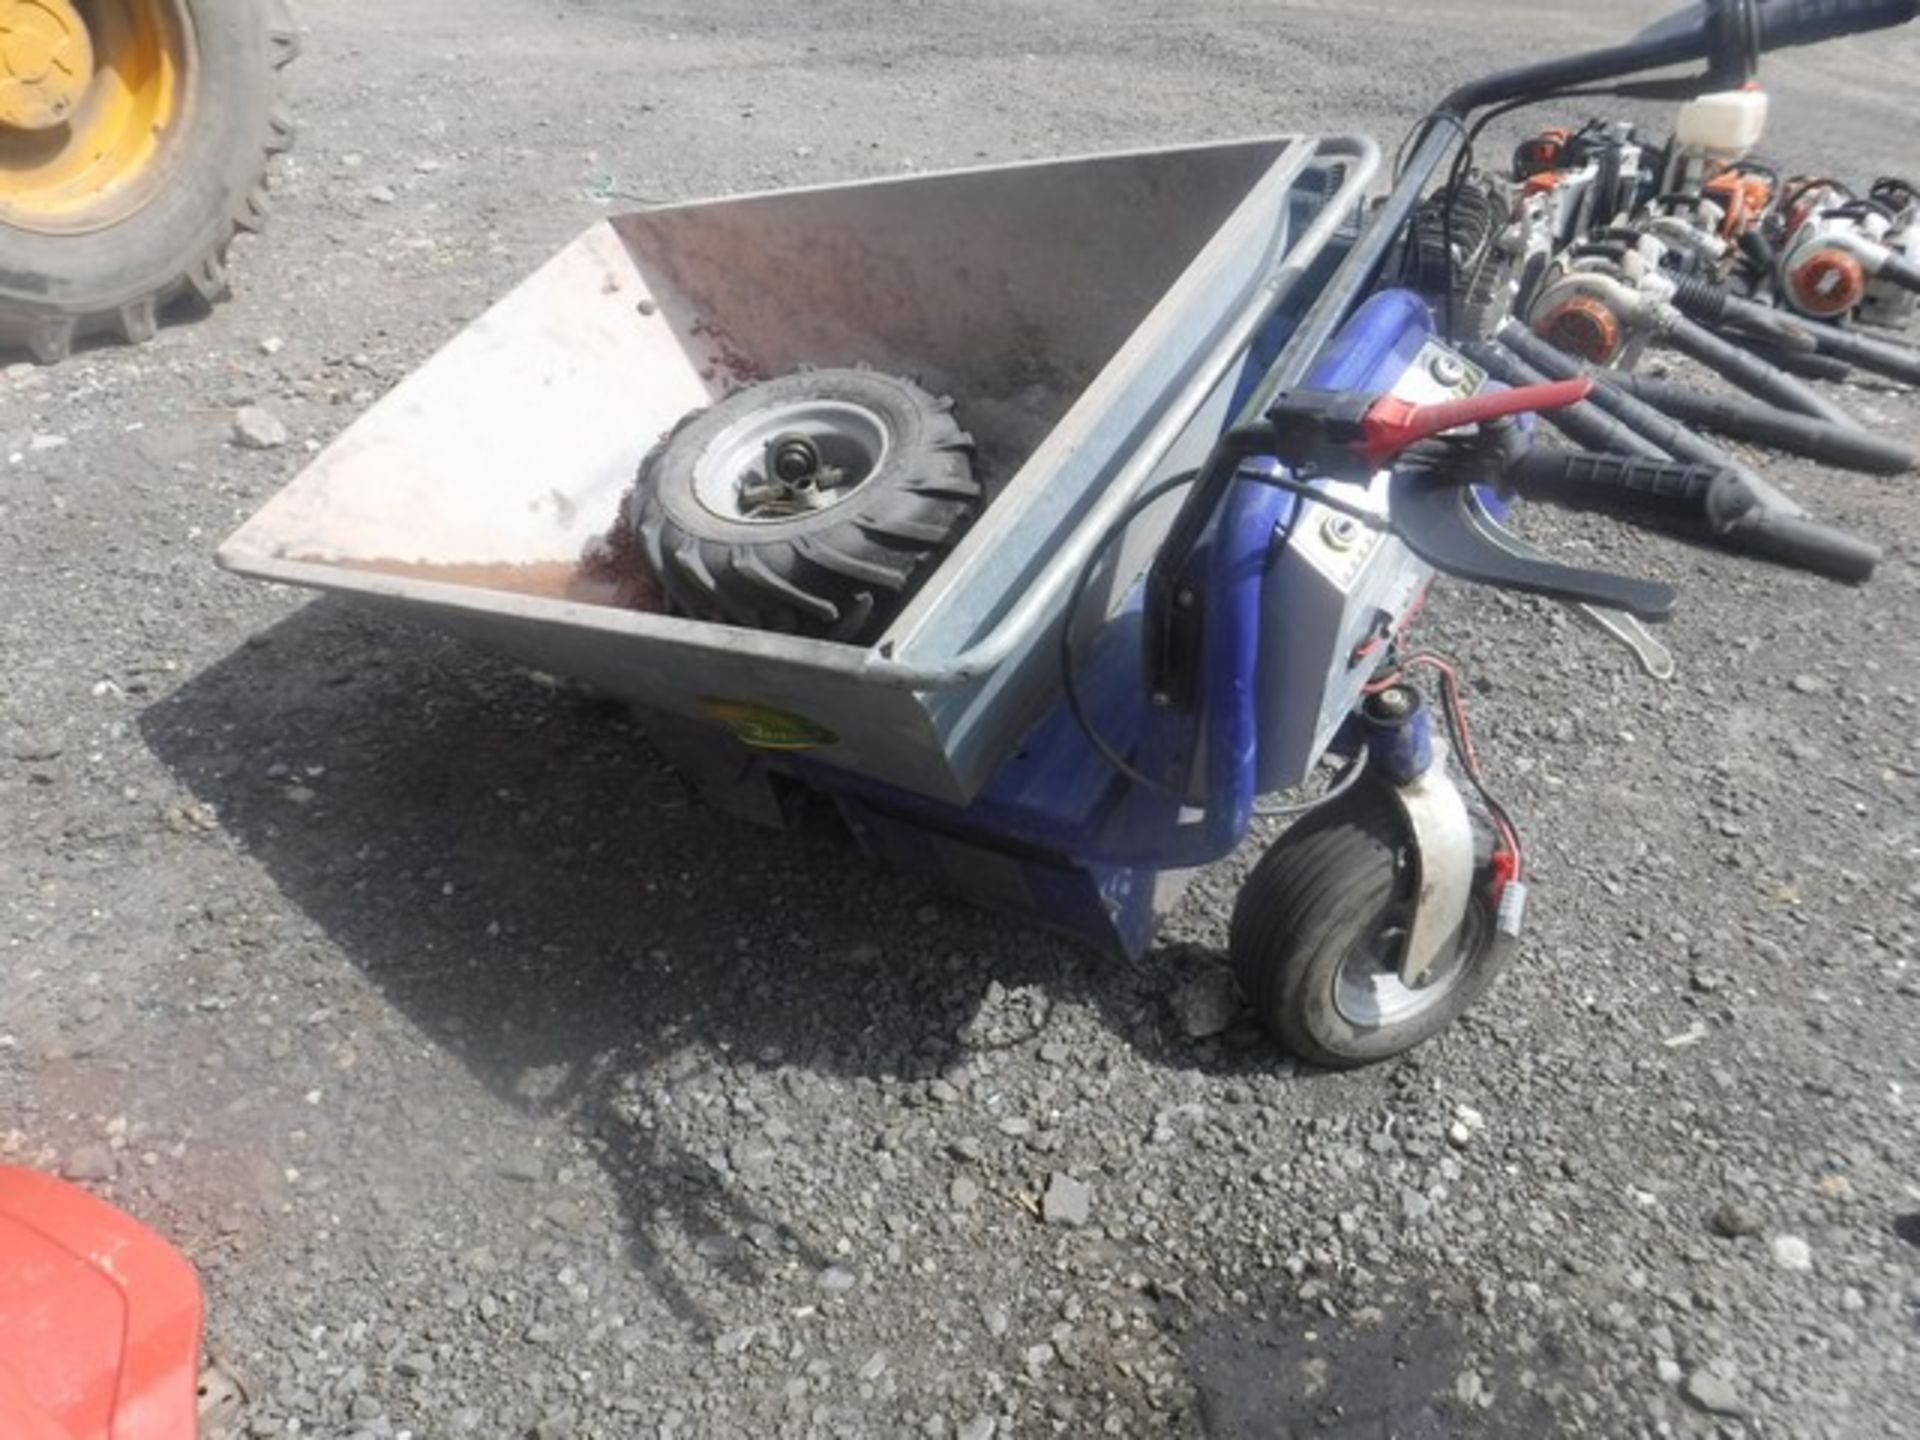 ZALLYS ELECTRIC BARROW - MODEL D1600W 80A **SPARES OR REPAIR** SN - 11319 - Image 2 of 4